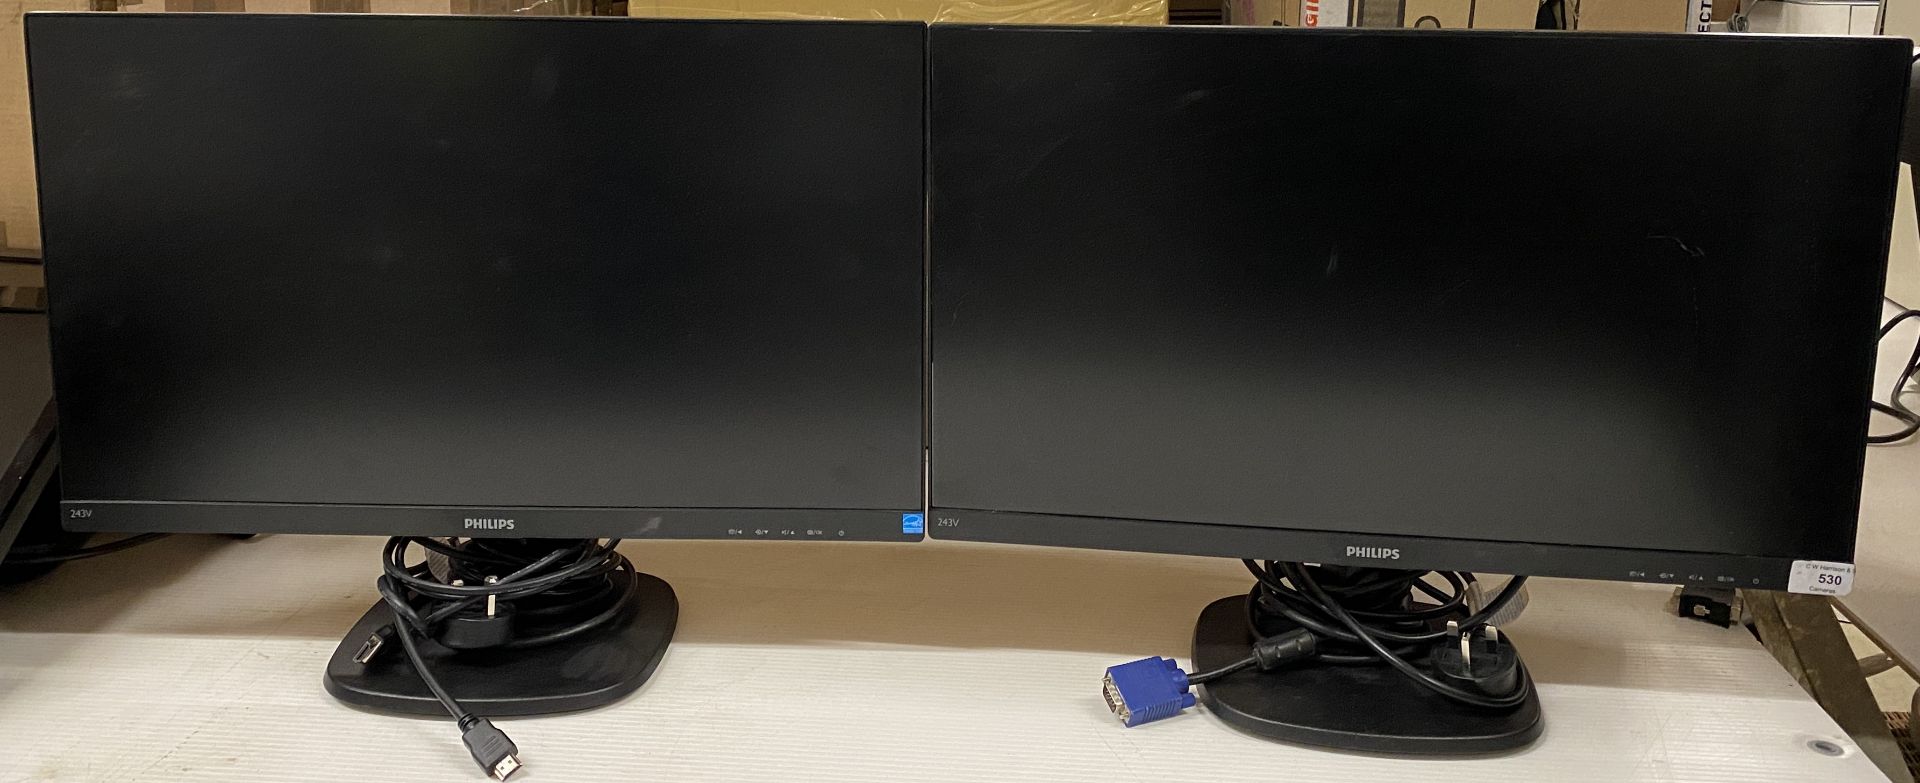 2 x 24" Philips 243V flat screen monitors on stands c/w power leads (saleroom location: M06)